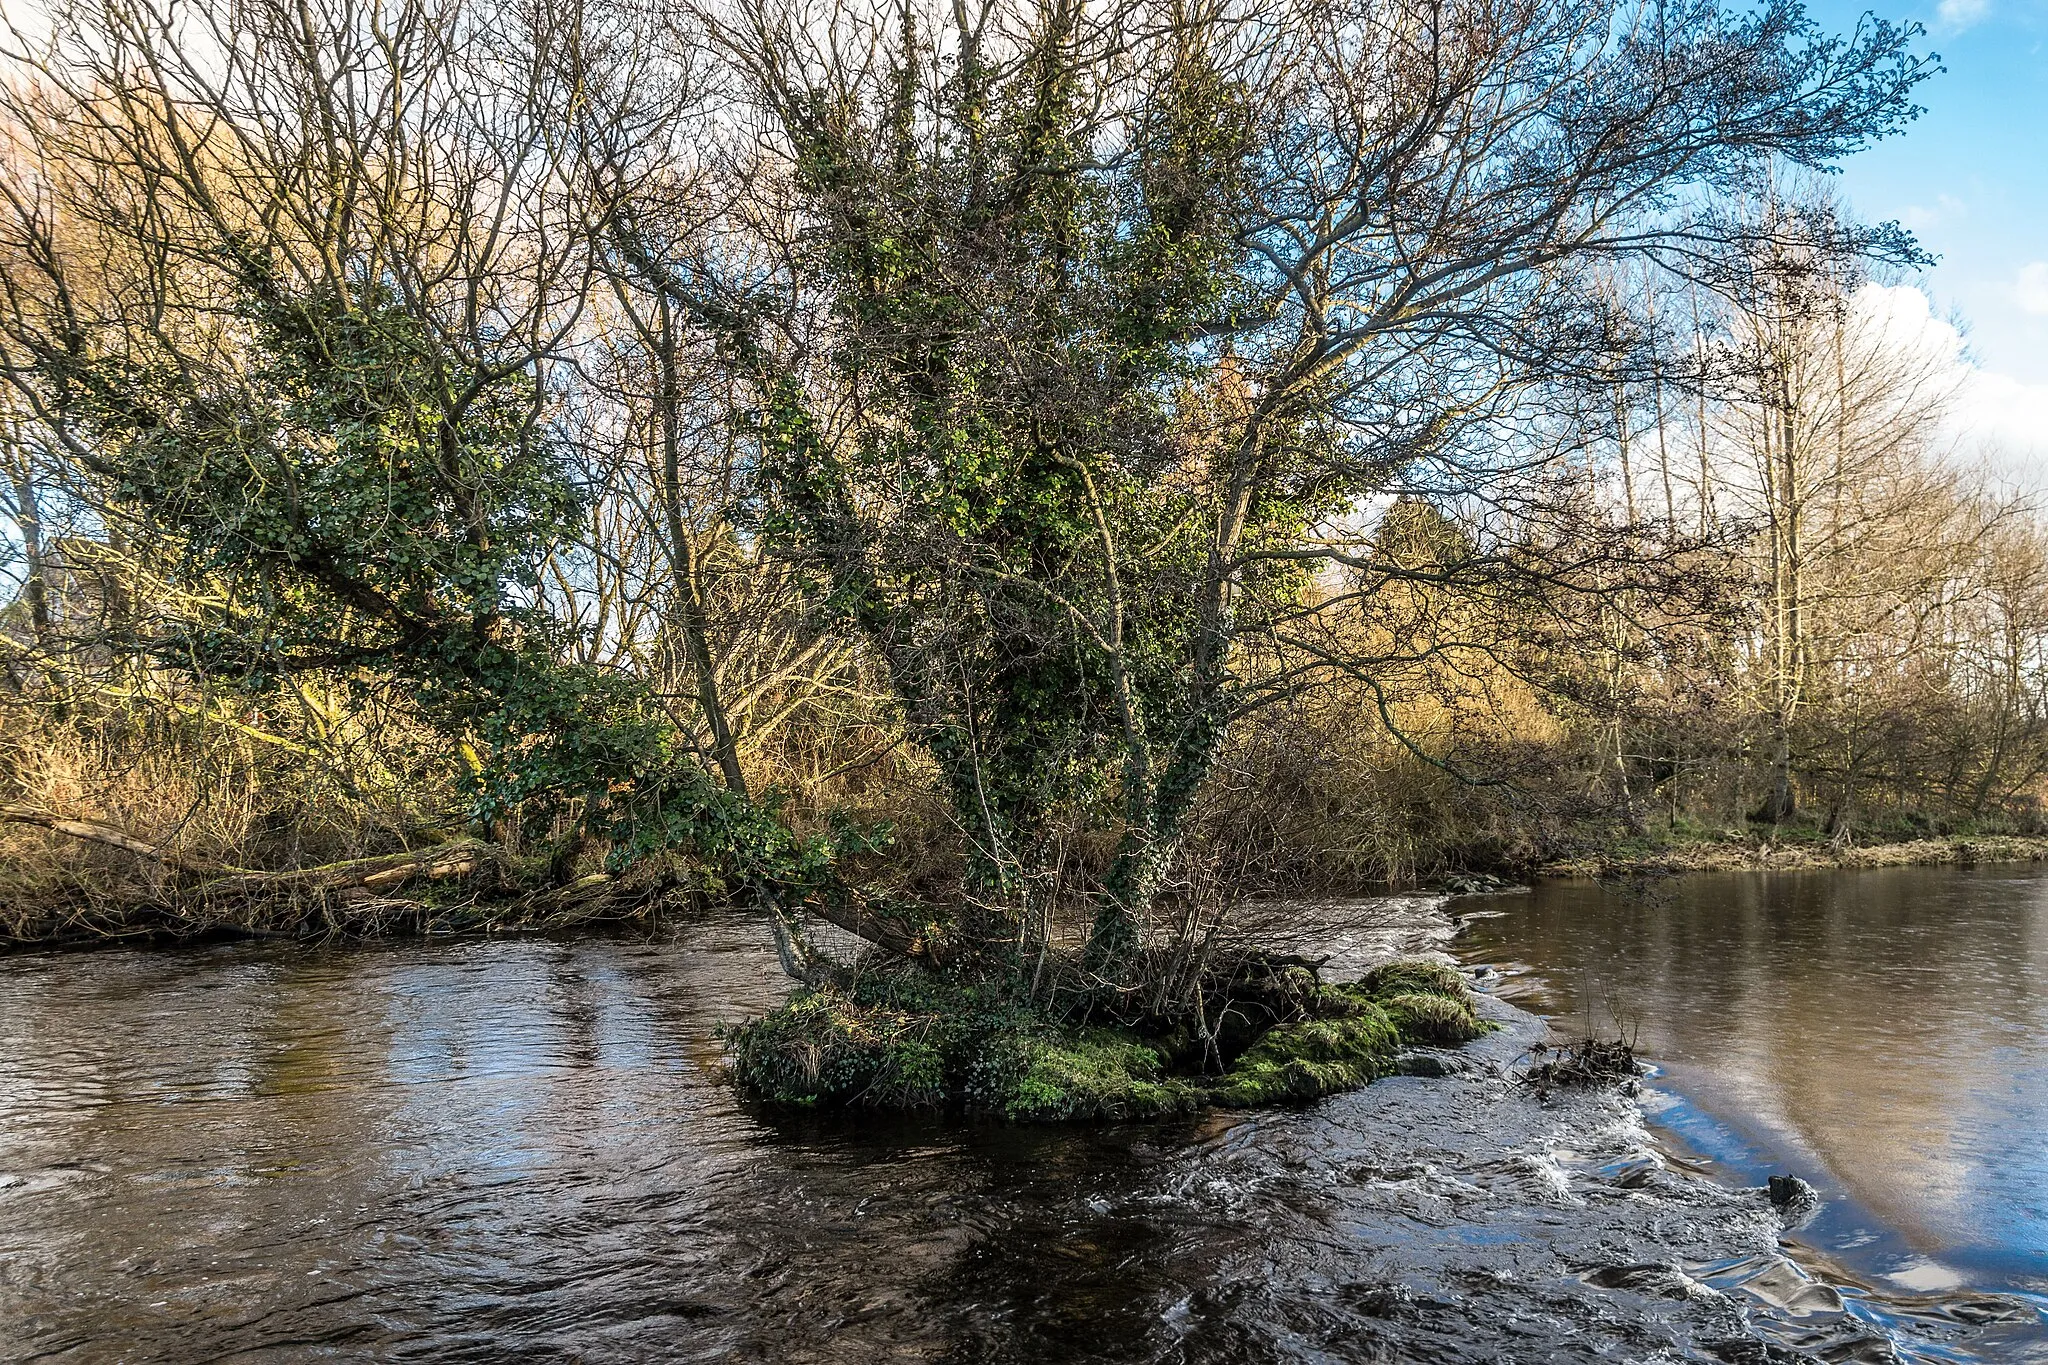 Photo showing: The town of Newbridge was built around the crossing point on the River Liffey. The river, which rises in the Sally Gap flows for most of its 92 miles through Co. Kildare. The Liffey Linear Park / Town Park is in the ownership of Droichead Nua Town Council.

The Liffey Linear Park extends along the full length of the River Liffey, and the area under management in Newbridge area is defined is the area enclosed from the Athgarvan Road entrance, through the area known as "The Strand", the "Watering Gates", the Liffey Bridge (Droichead Conlaoch), and along the riverbanks to the Dominican College.